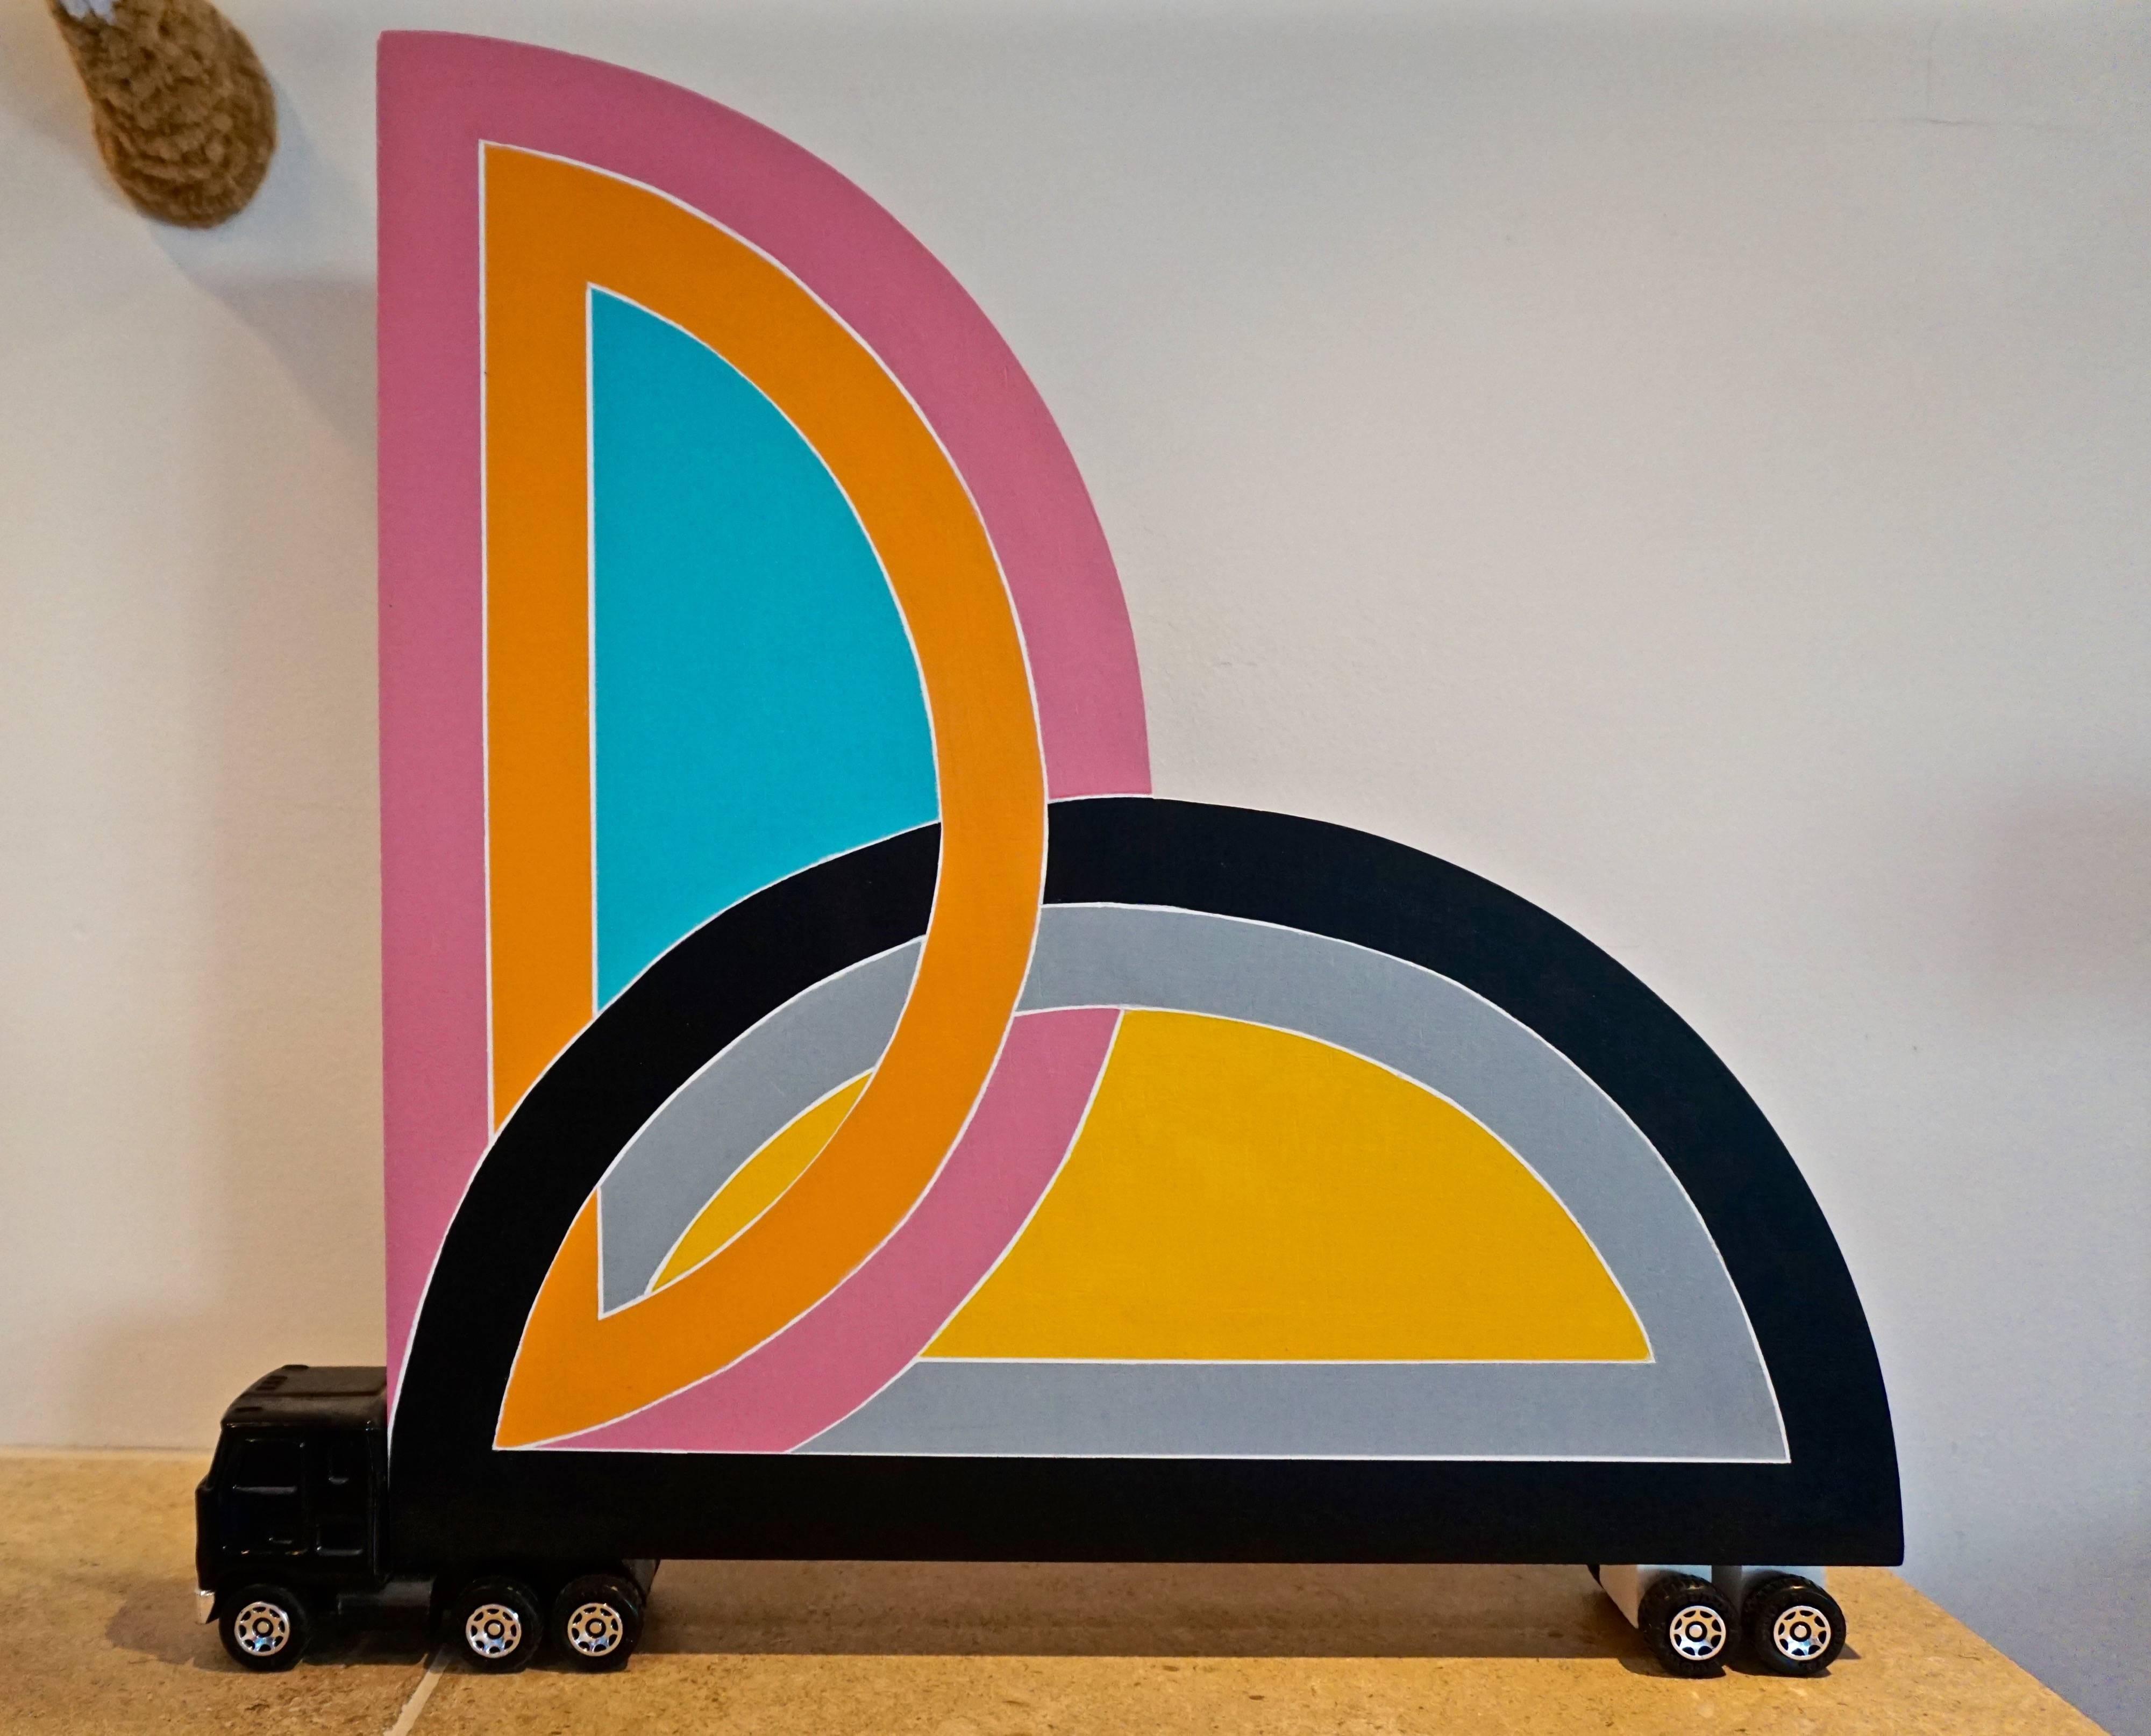 Double sided, signed and dated truck series.
Hand-painted construction, acrylic on wood with toy truck parts.